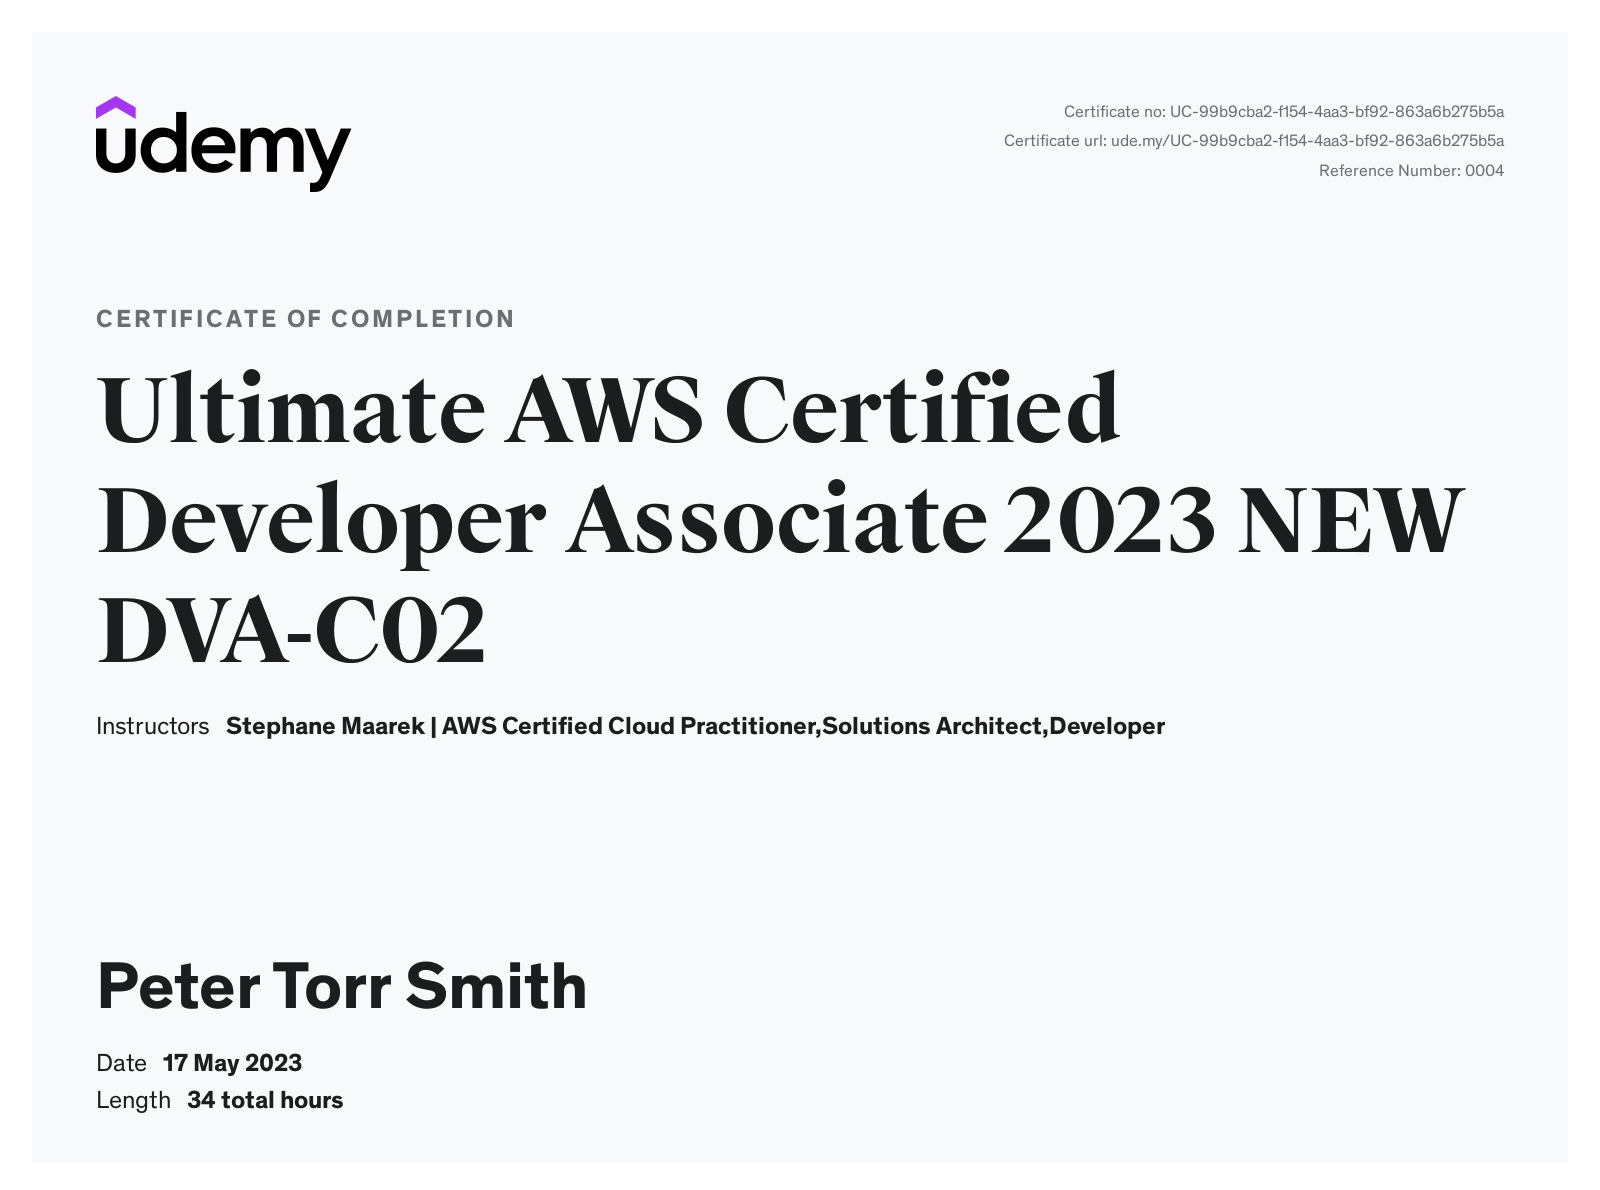 Certificate for Completing Udemy Ultimate AWS Certified Developer Associate 2023 NEW DVA-C02
 course